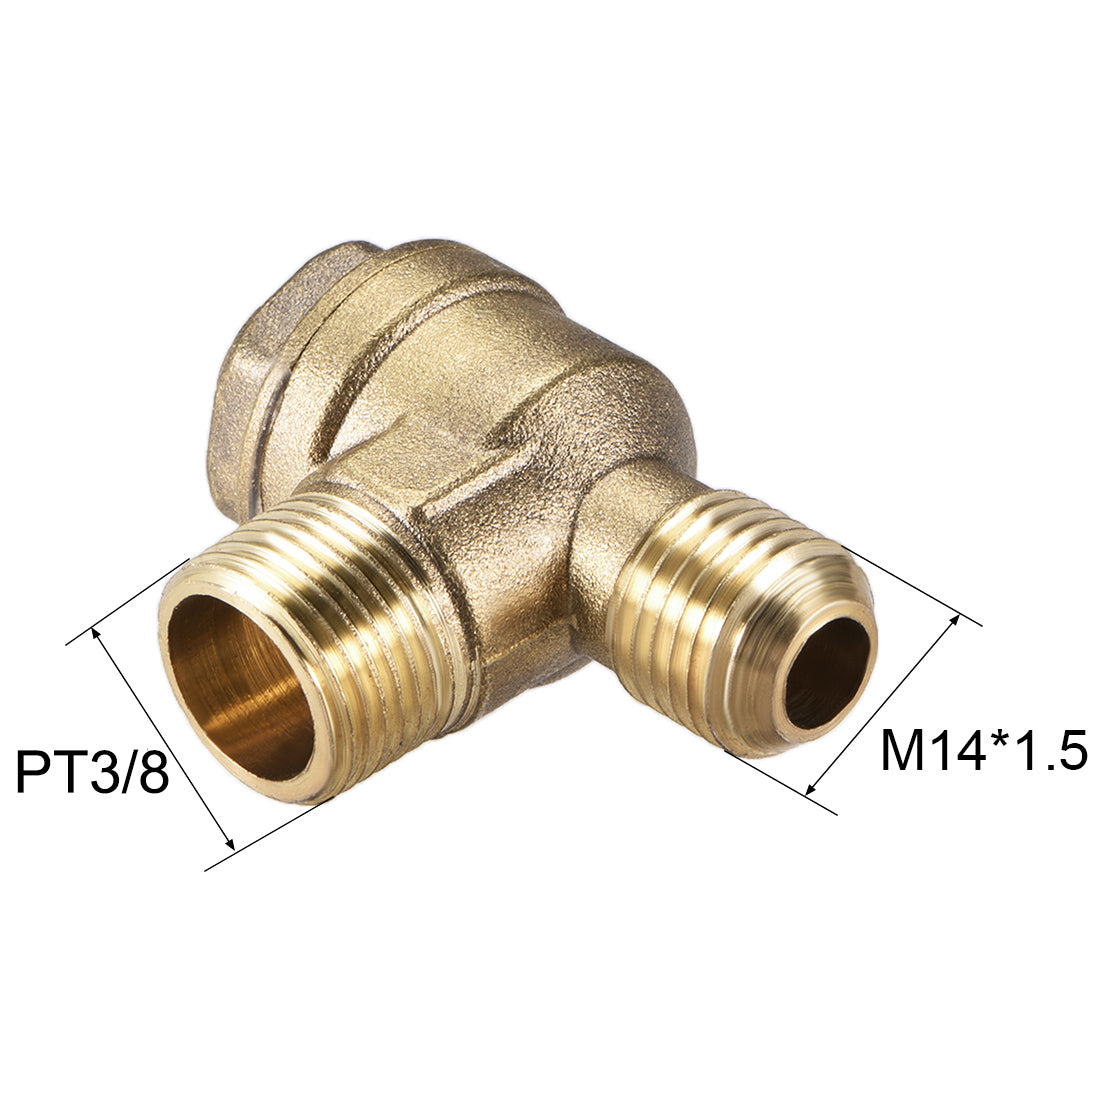 uxcell Uxcell Air Compressor Check Valve 90 Degree Male Threaded Connector PT3/8"xM14*1.5 2Pcs